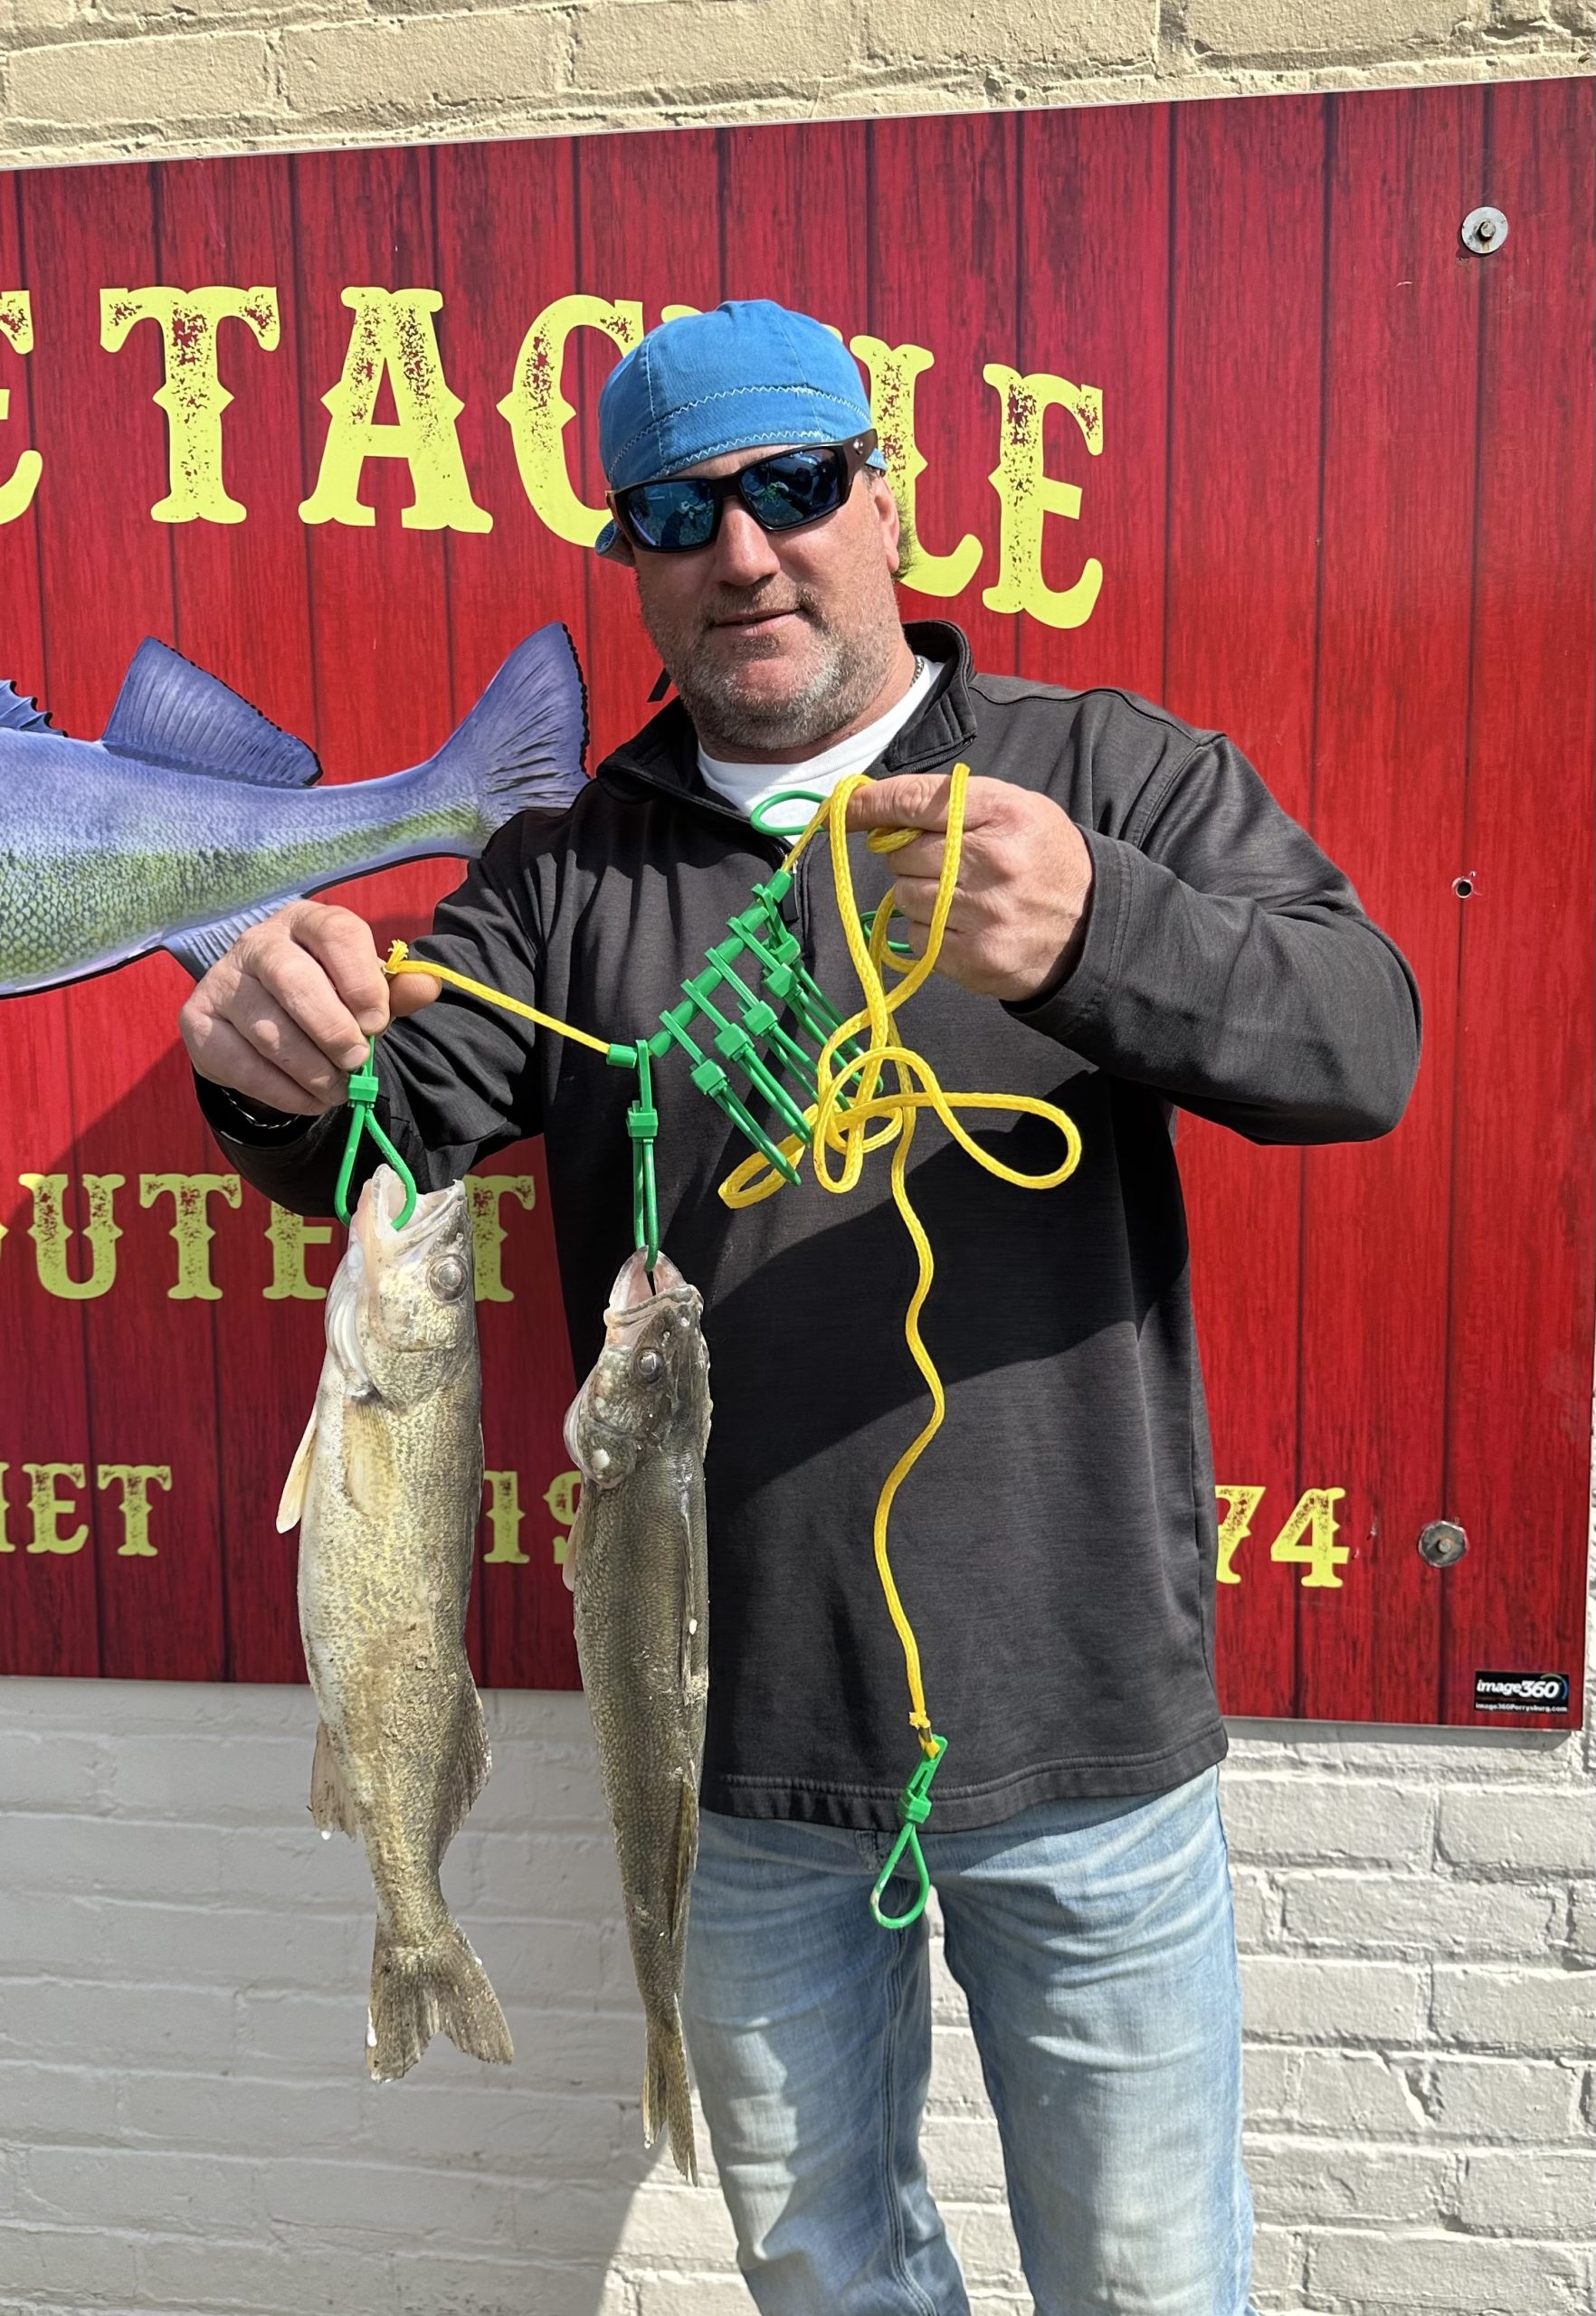 Maumee River report , 5 march 24